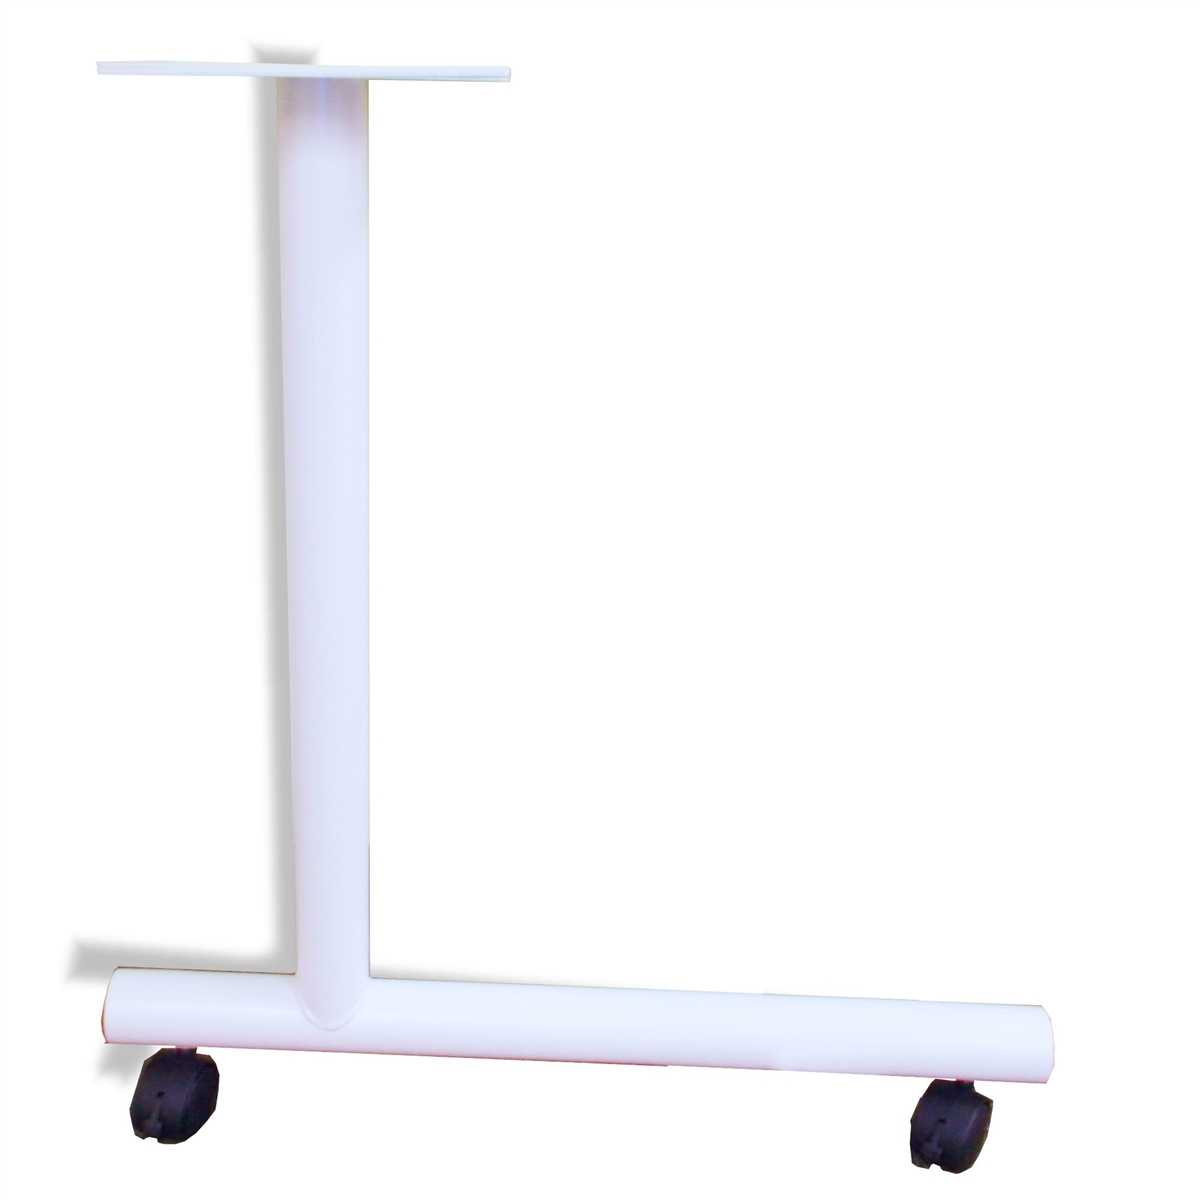 C-Shaped Metal Table Base With Locking Casters for 30" Deep Worktops -  White Finish